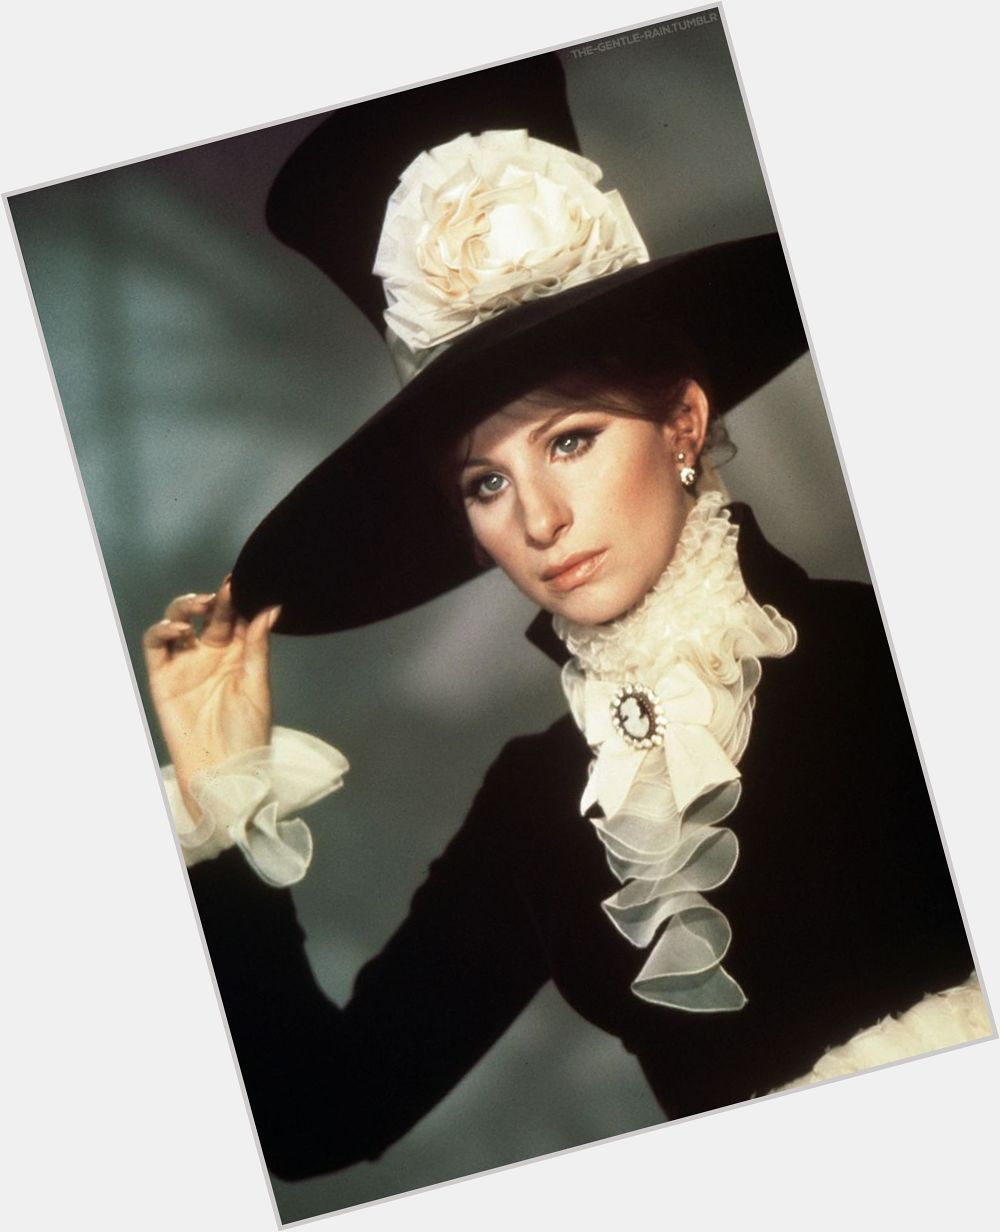 Happy birthday American singer and actress Barbra Streisand, now 80 years old. 